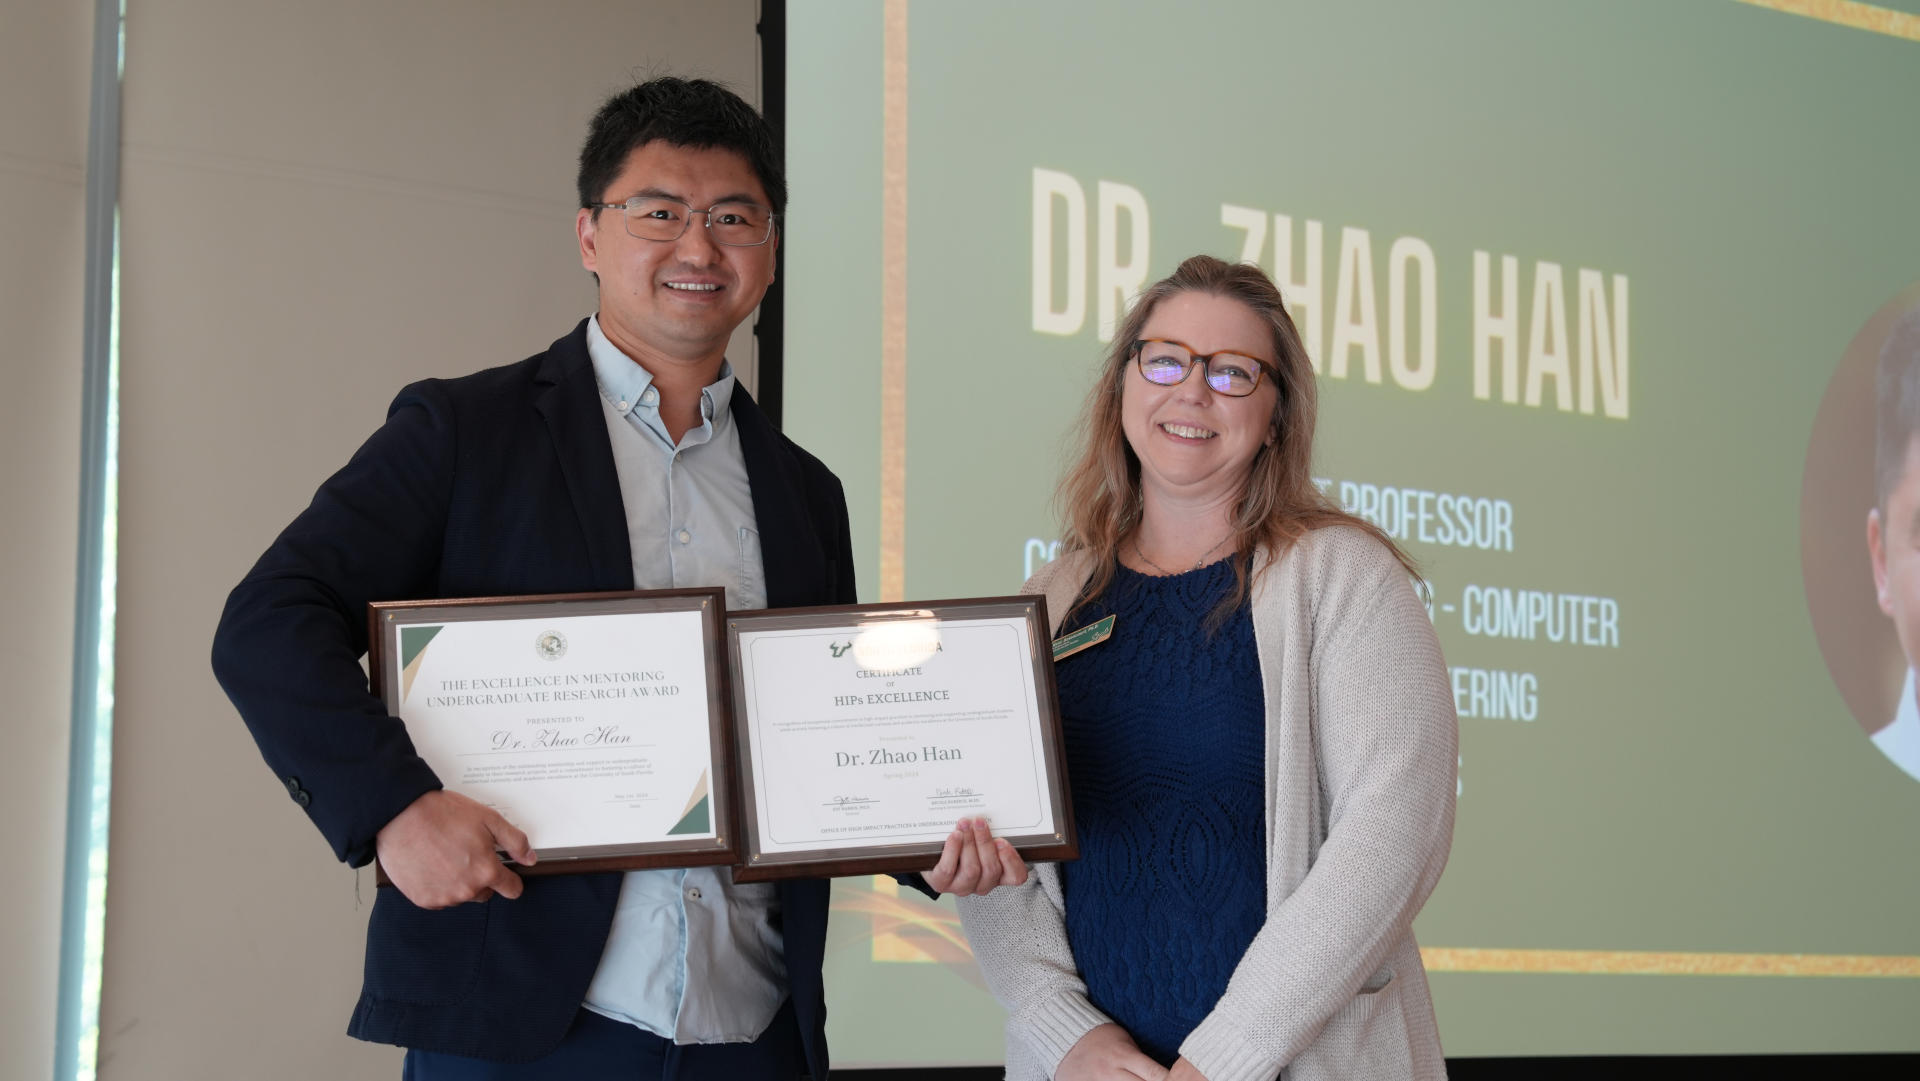 Excellence in Mentoring Undergraduate Research Award – Faculty